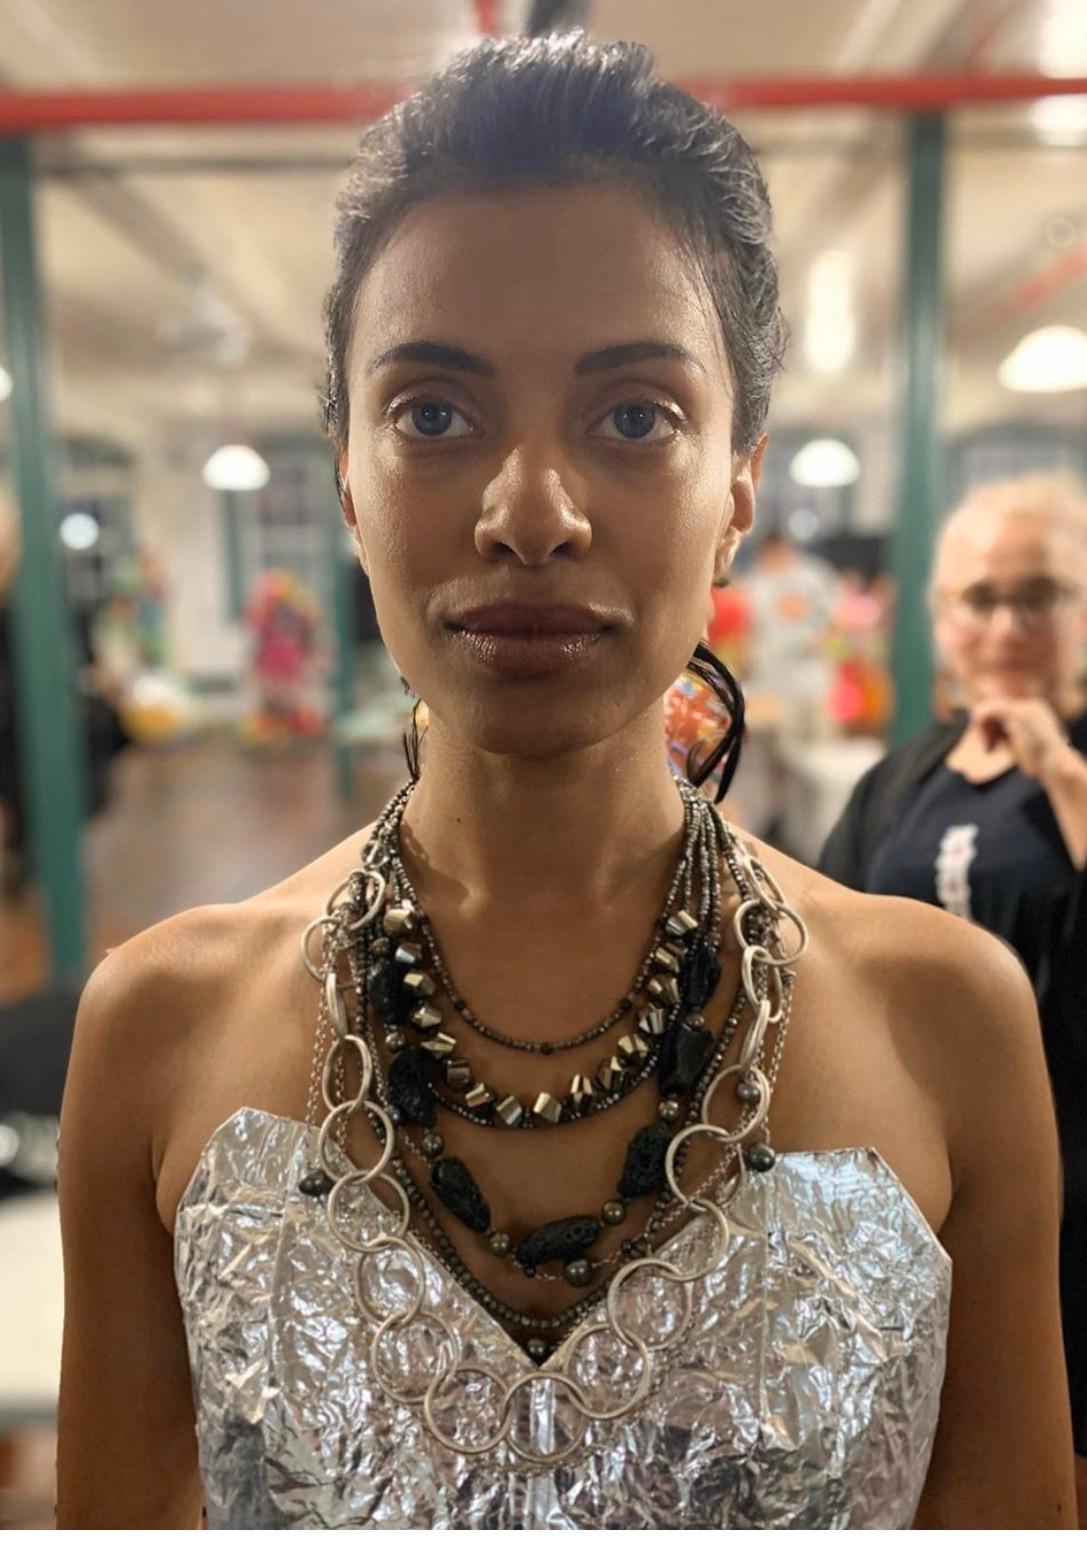 Take a glimpse into the apocalyptic world with Jane Magon Collections in this one of kind Dystopia Necklace with multiple strands of Sterling Silver Chains holding Meteorites, Pyrite, Black Fresh Water Pearls, Quartz Crystals, and Stone with a Round